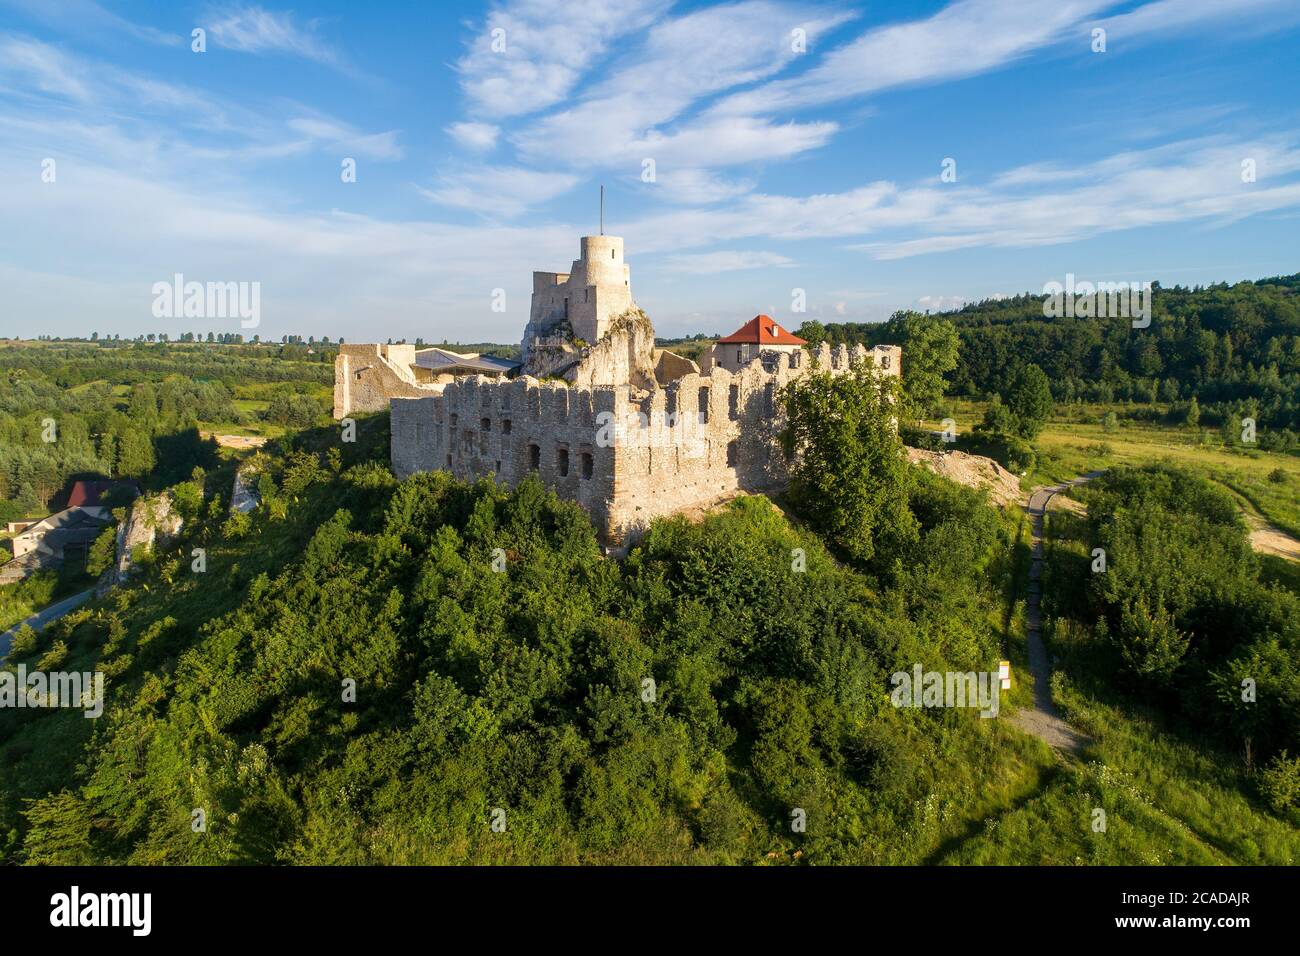 Rabsztyn, Poland. Ruins of medieval royal castle on the rock in Polish Jurassic Highland. Aerial view in sunrise light in summer Stock Photo